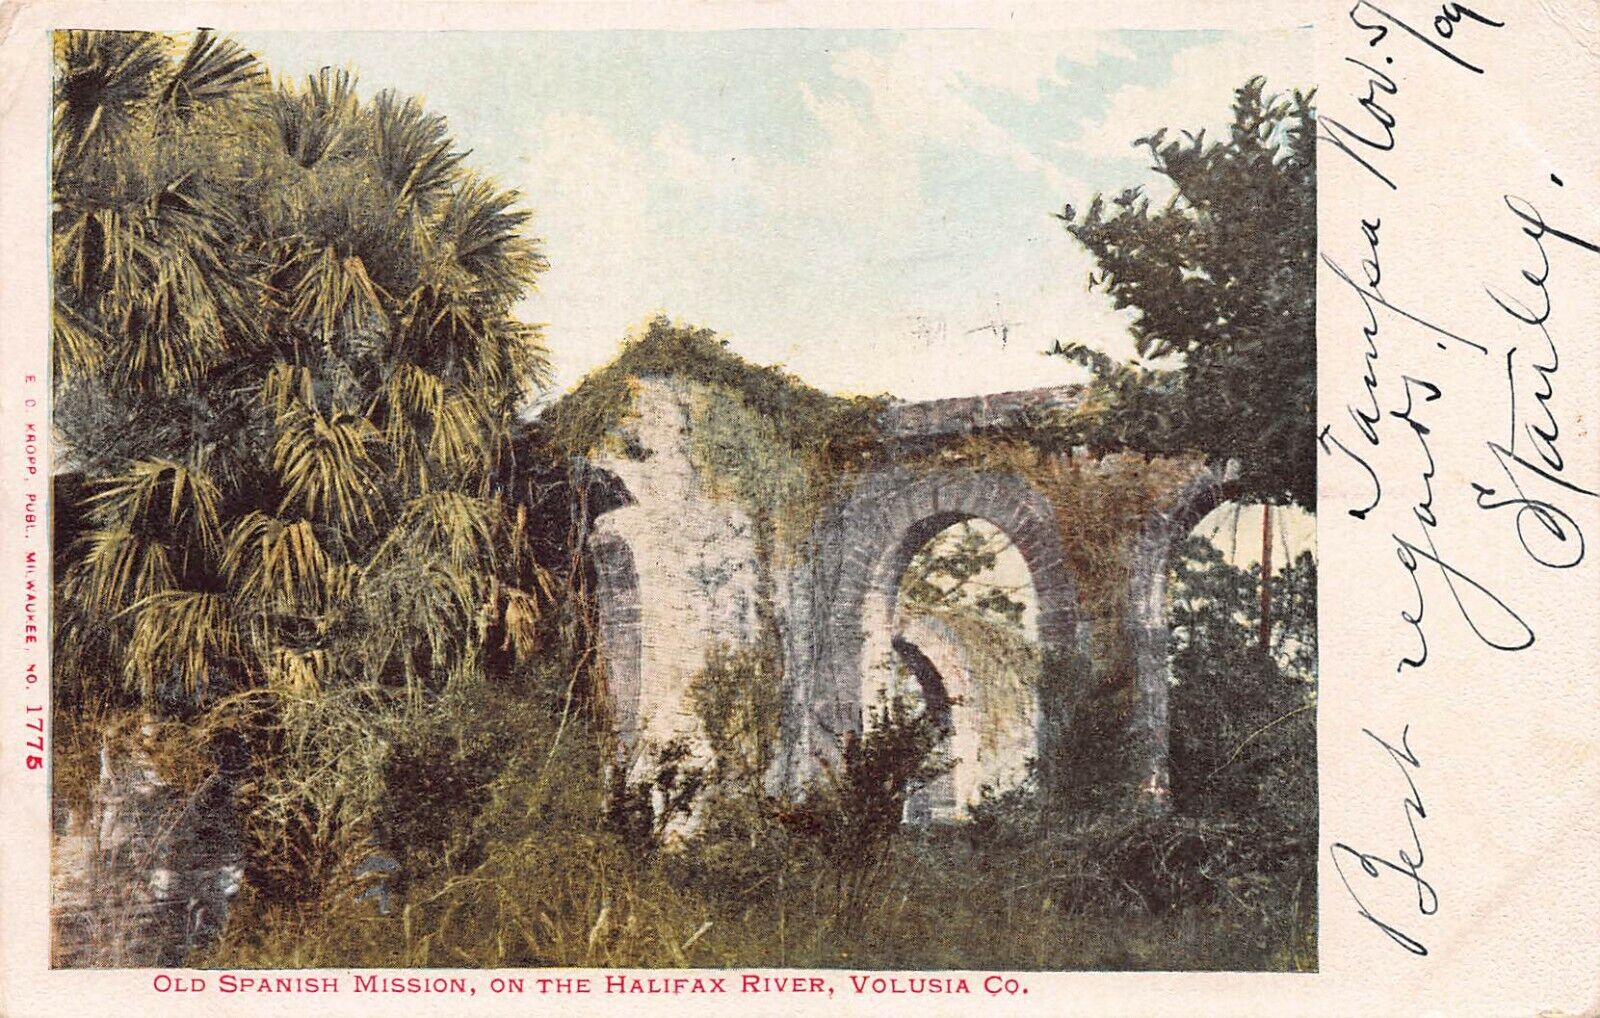 Old Spanish Mission, On the Halifax River, Volusia Co., Florida, 1909 Postcard